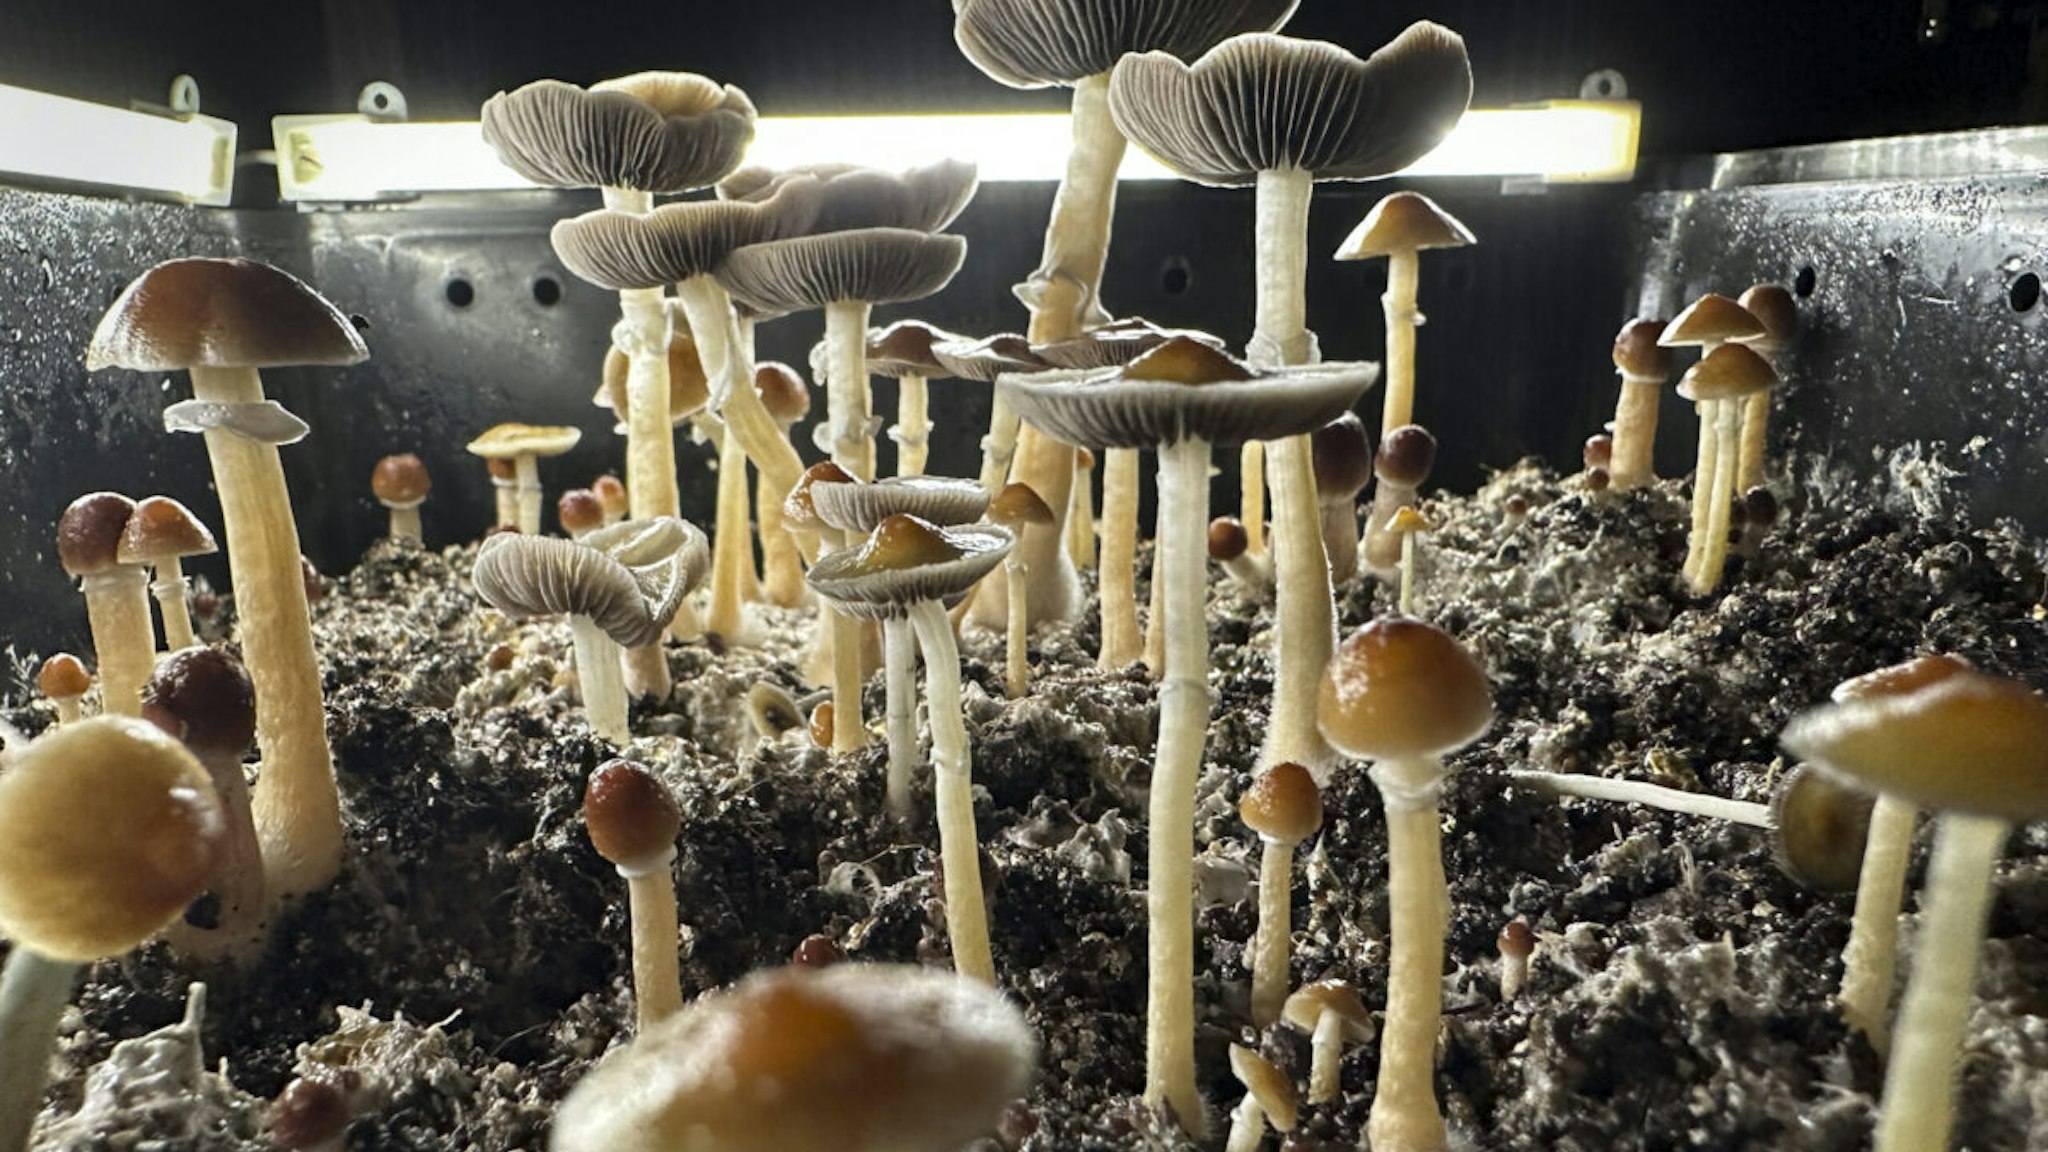 FAIRFIELD COUNTY, CONNECTICUT - JULY 28: Psilocybin mushrooms stand ready for harvest in a humidified "fruiting chamber" in the basement of a private home on July 28, 2023 in Fairfield County, Connecticut. Recent studies have suggested that psilocybin mushrooms, also known as "magic mushrooms" have shown promise in combating anxiety, anorexia, depression, PTSD, obsessive-compulsive disorder and various forms of substance abuse. Scientists say psilocybin may promote neuroplasticity, a rewiring of the brain that gives patients fresh perspectives on longstanding psychiatric problems. Although psilocybin is classified in the U.S. as a Schedule 1 substance, making it illegal by federal law, many municipalities throughout the United States, as well as the state of Colorado have moved to decriminalize it locally. Oregon has legalized the adult use of mushrooms, which currently must be administered within regulated "psilocybin service centers."